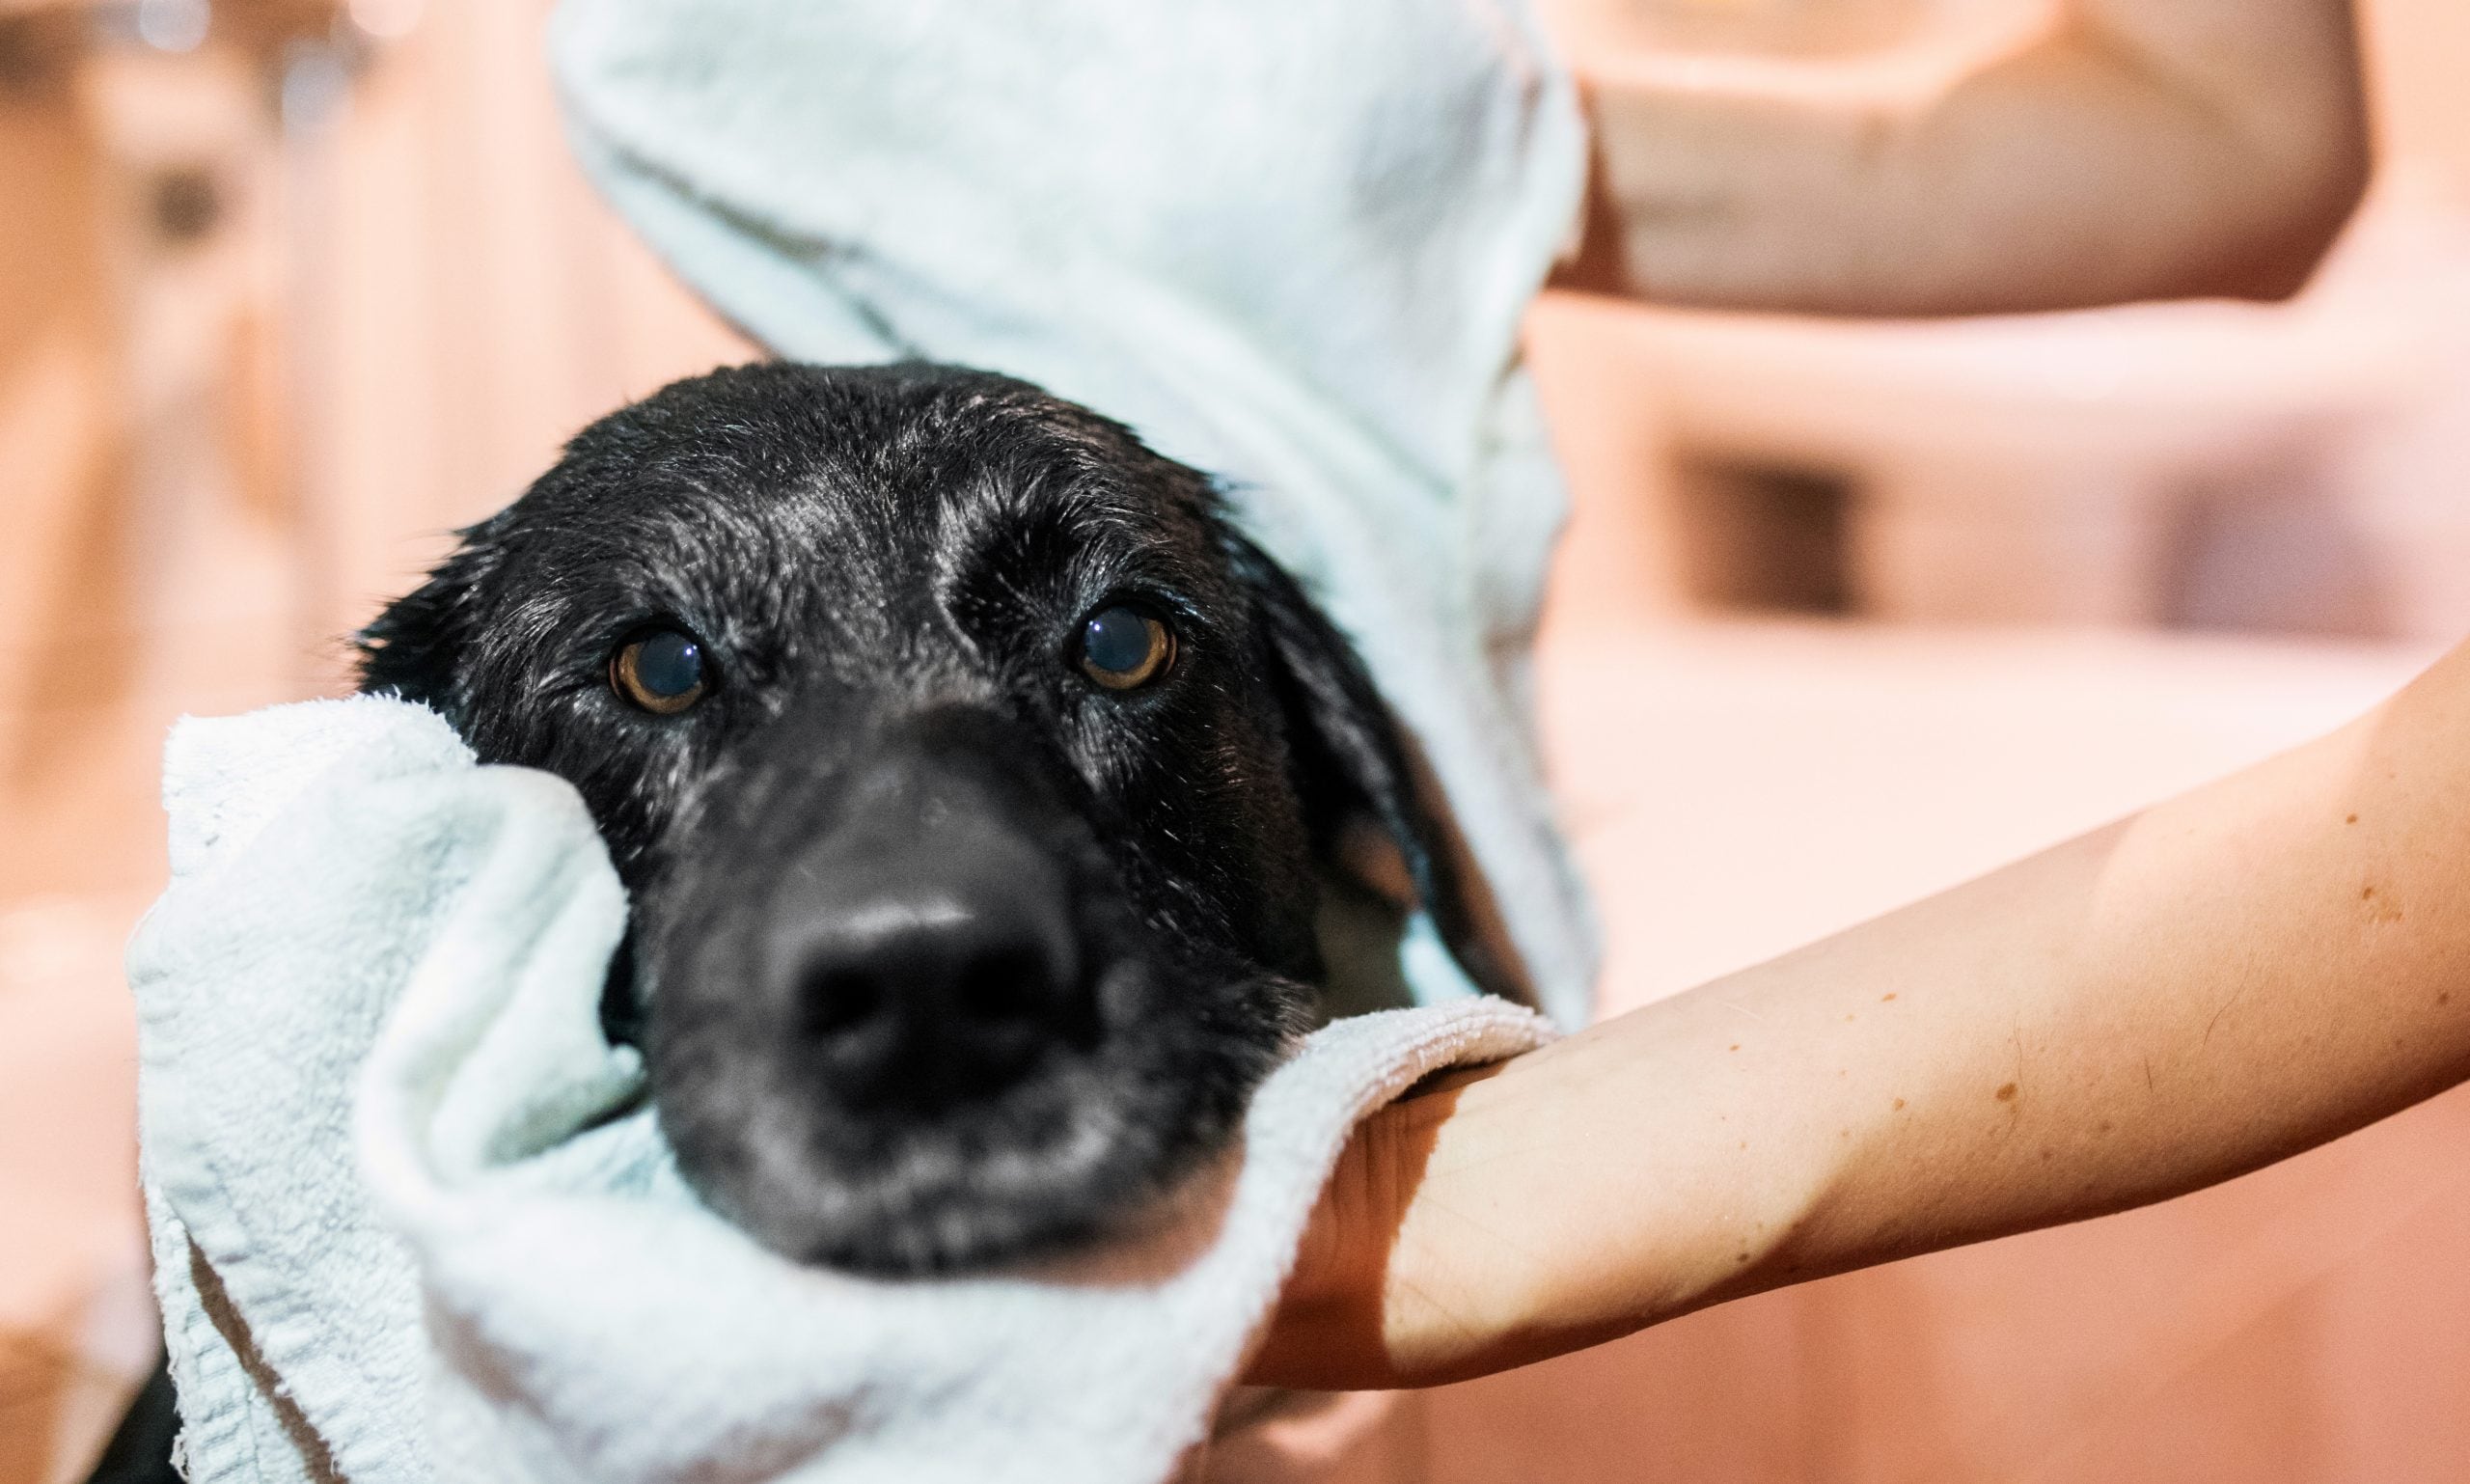 How Often Should You Oil Your Clippers?, by Questions About Dogs